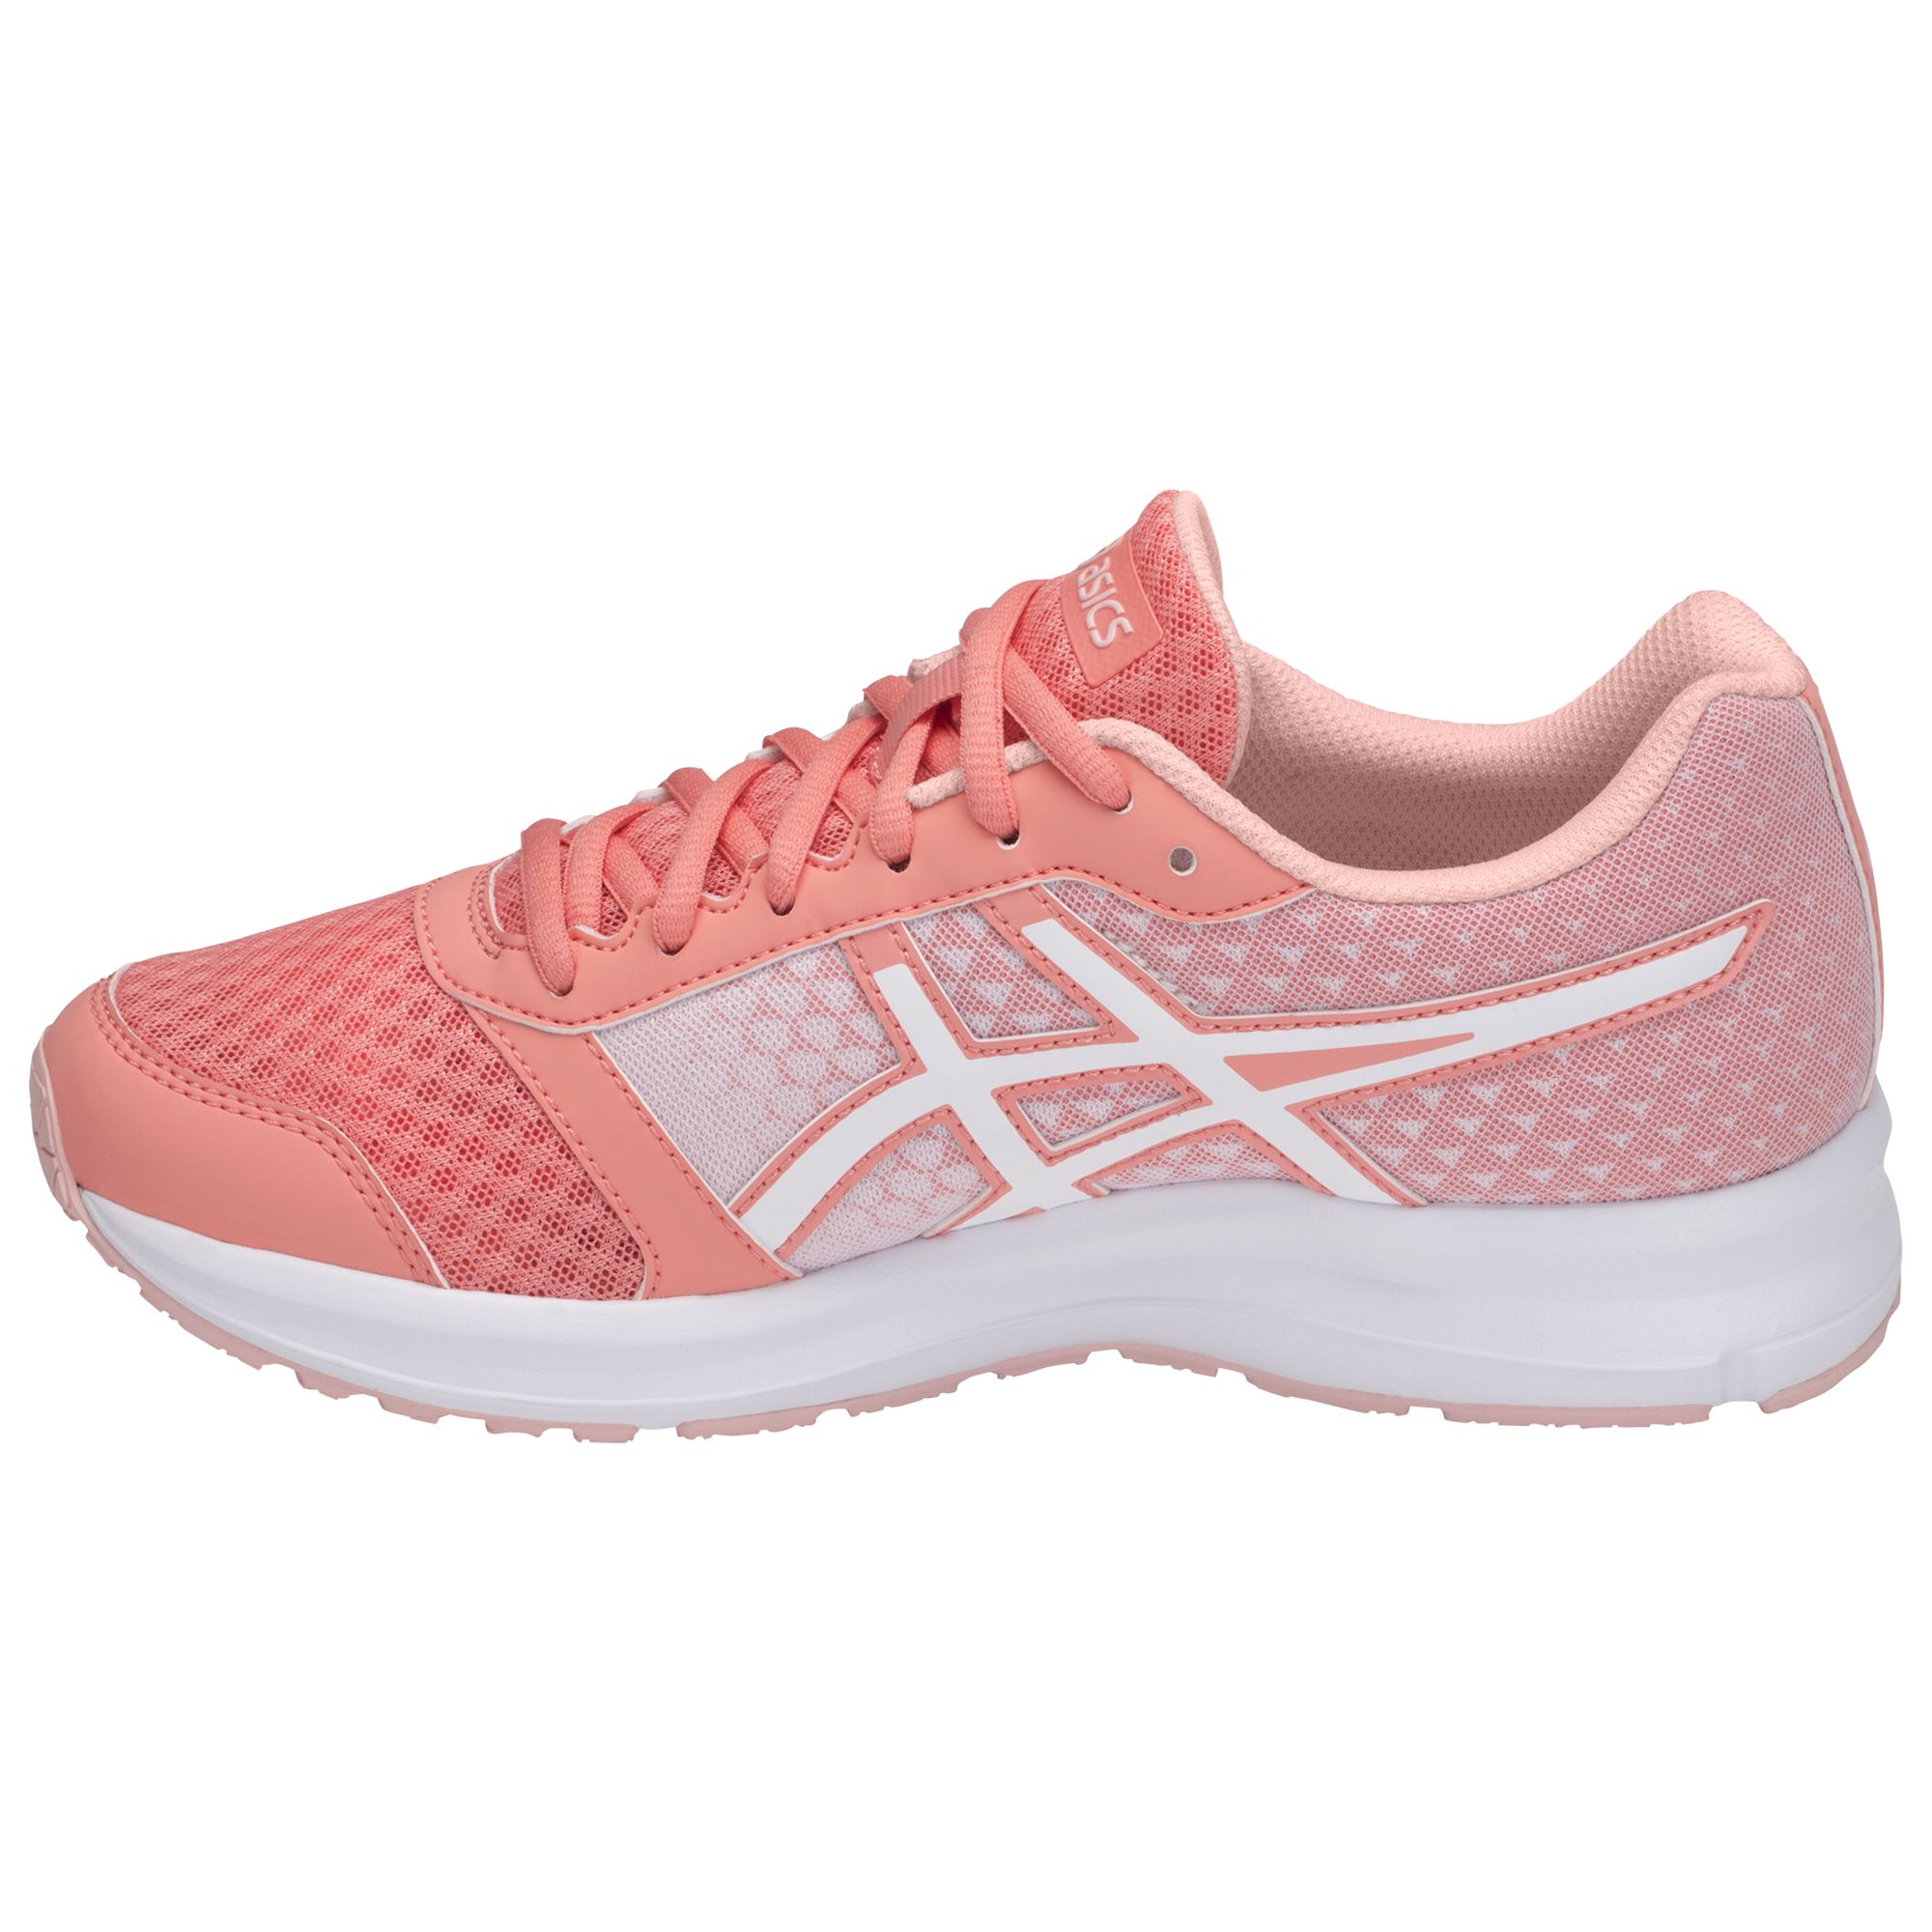 asics patriot 9 running shoes ladies review